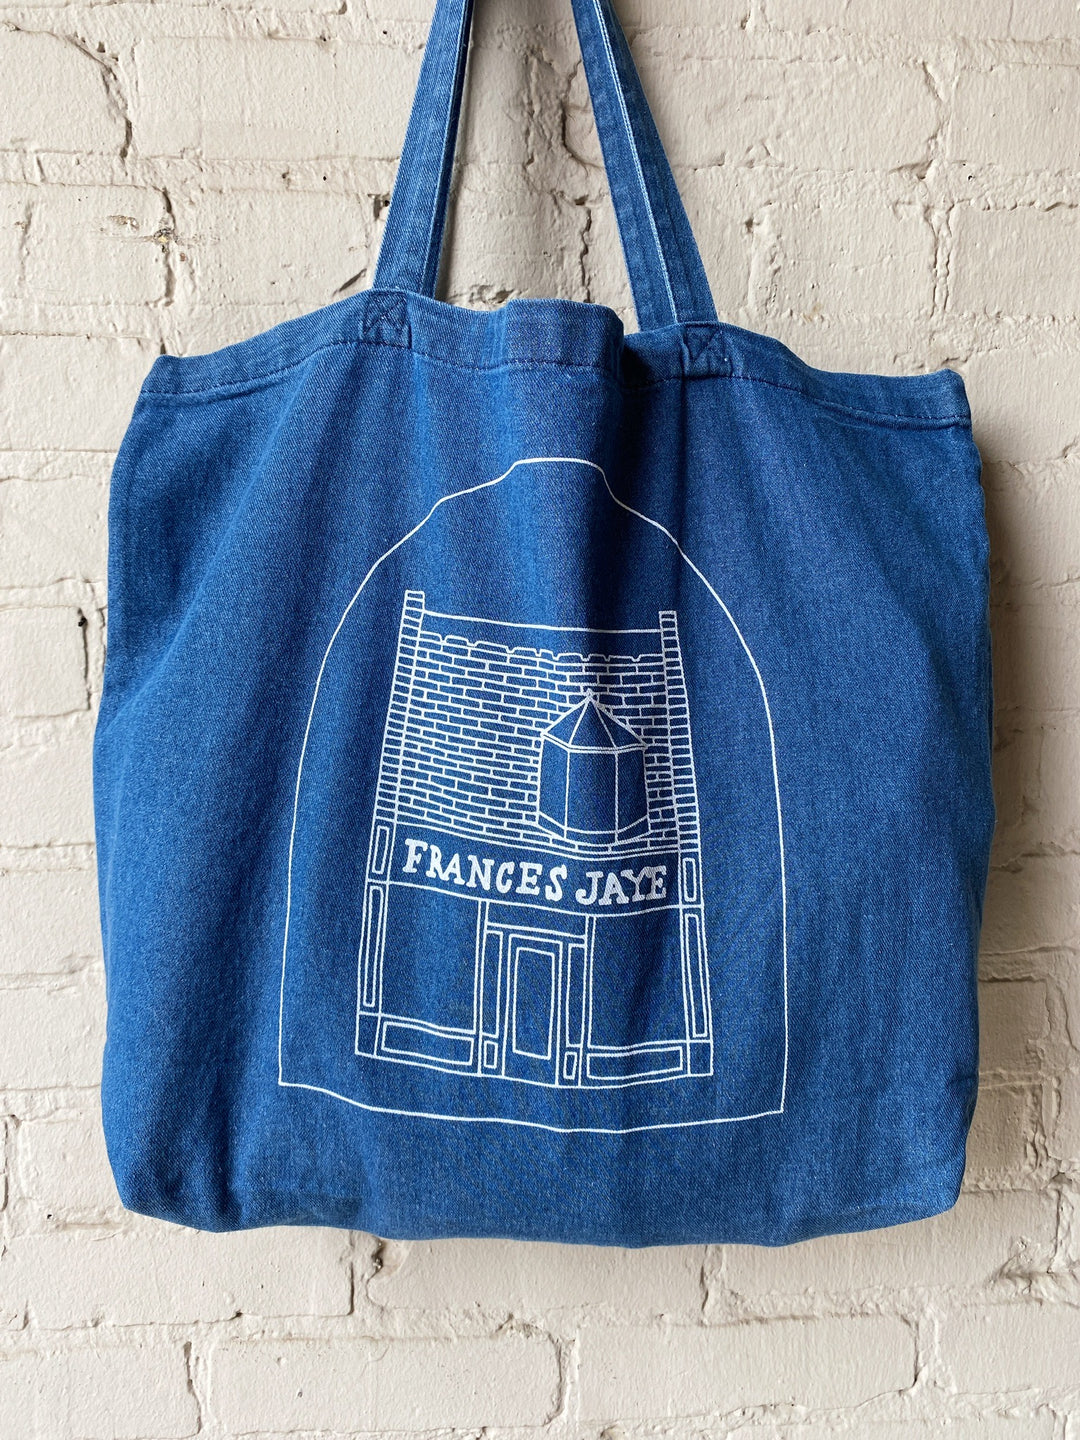 A denim tote with a sketch of the Frances Jaye store front on it.